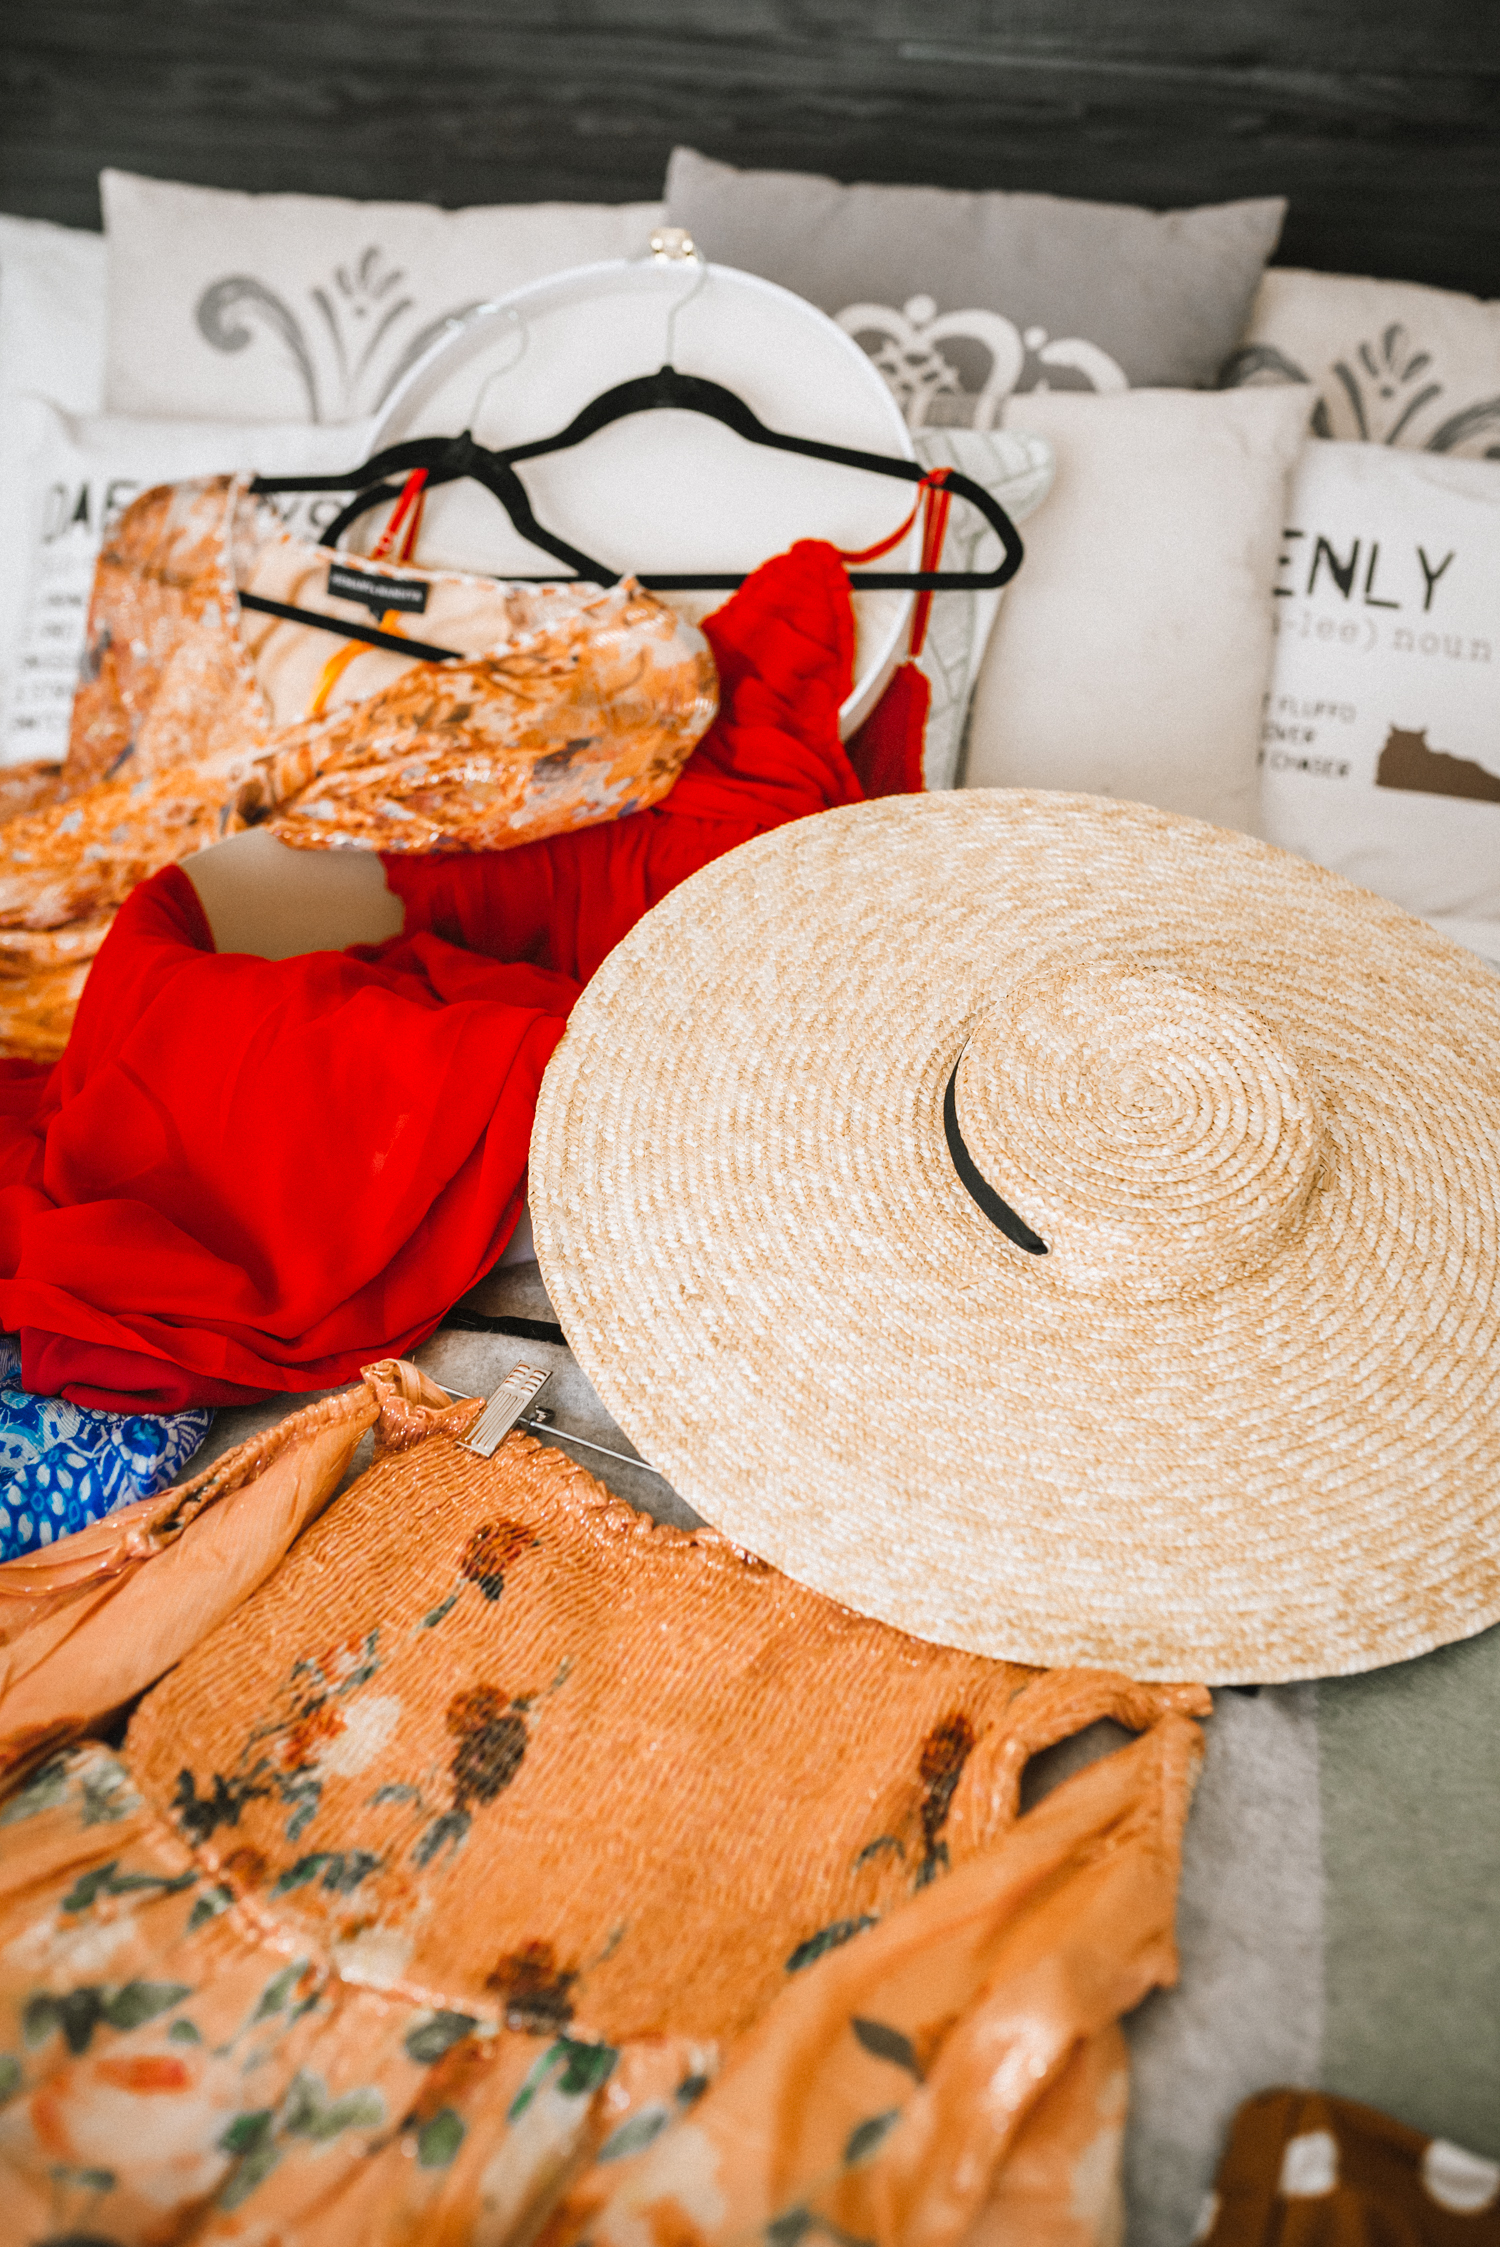 Former Miss USA 2011 Alyssa Campanella of The A List blog shares her Cayman Islands packing list with Hemant & Nandita and Jacquemus Santon hat